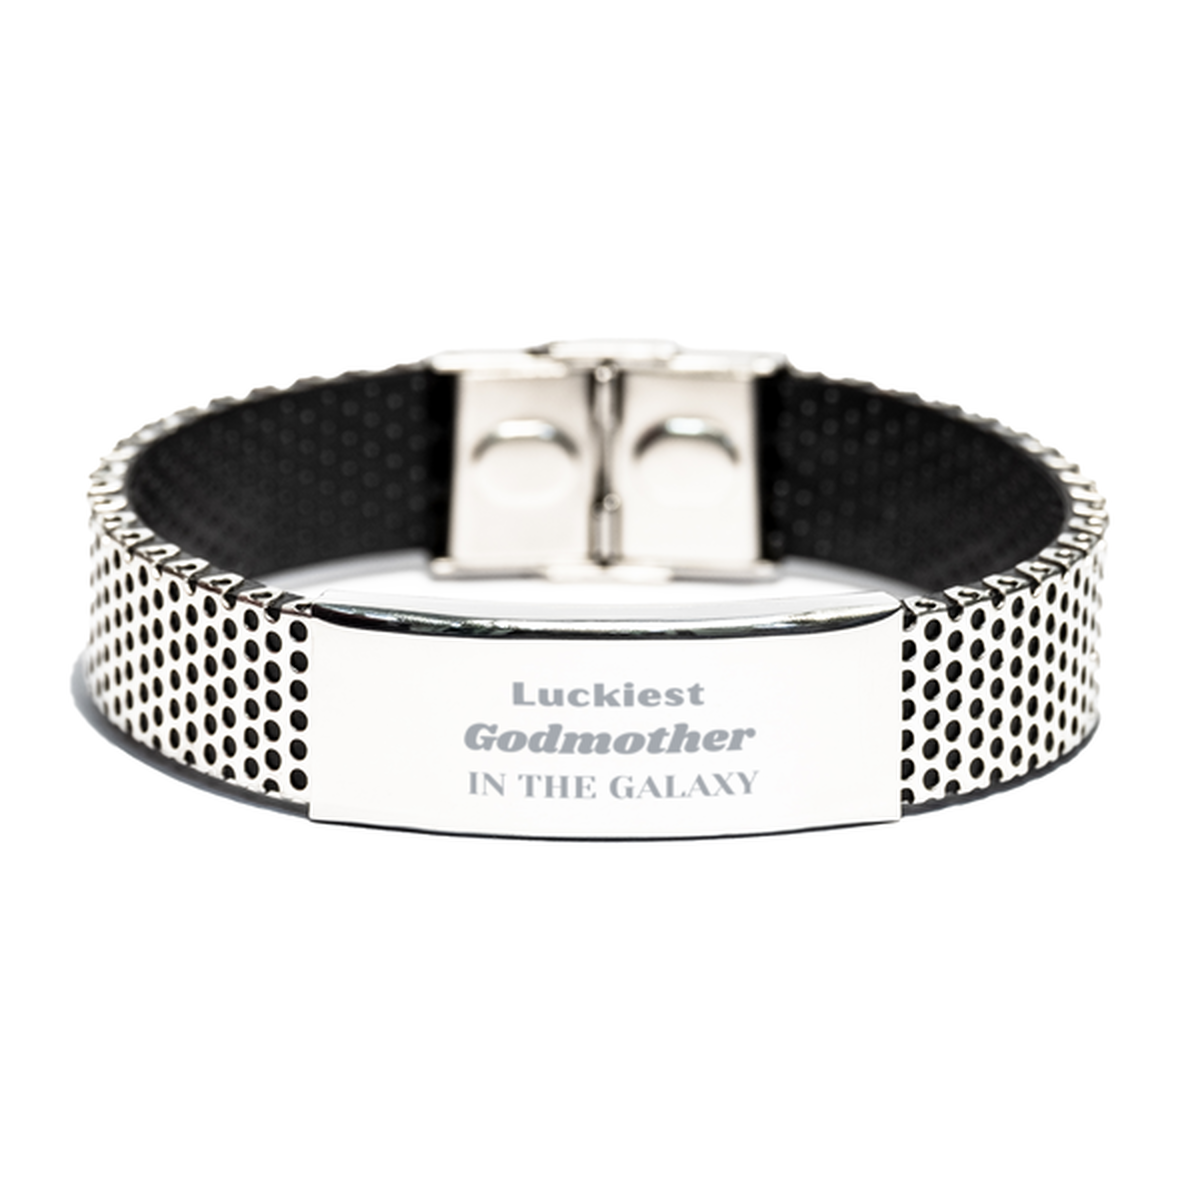 Luckiest Godmother in the Galaxy, To My Godmother Engraved Gifts, Christmas Godmother Stainless Steel Bracelet Gifts, X-mas Birthday Unique Gifts For Godmother Men Women